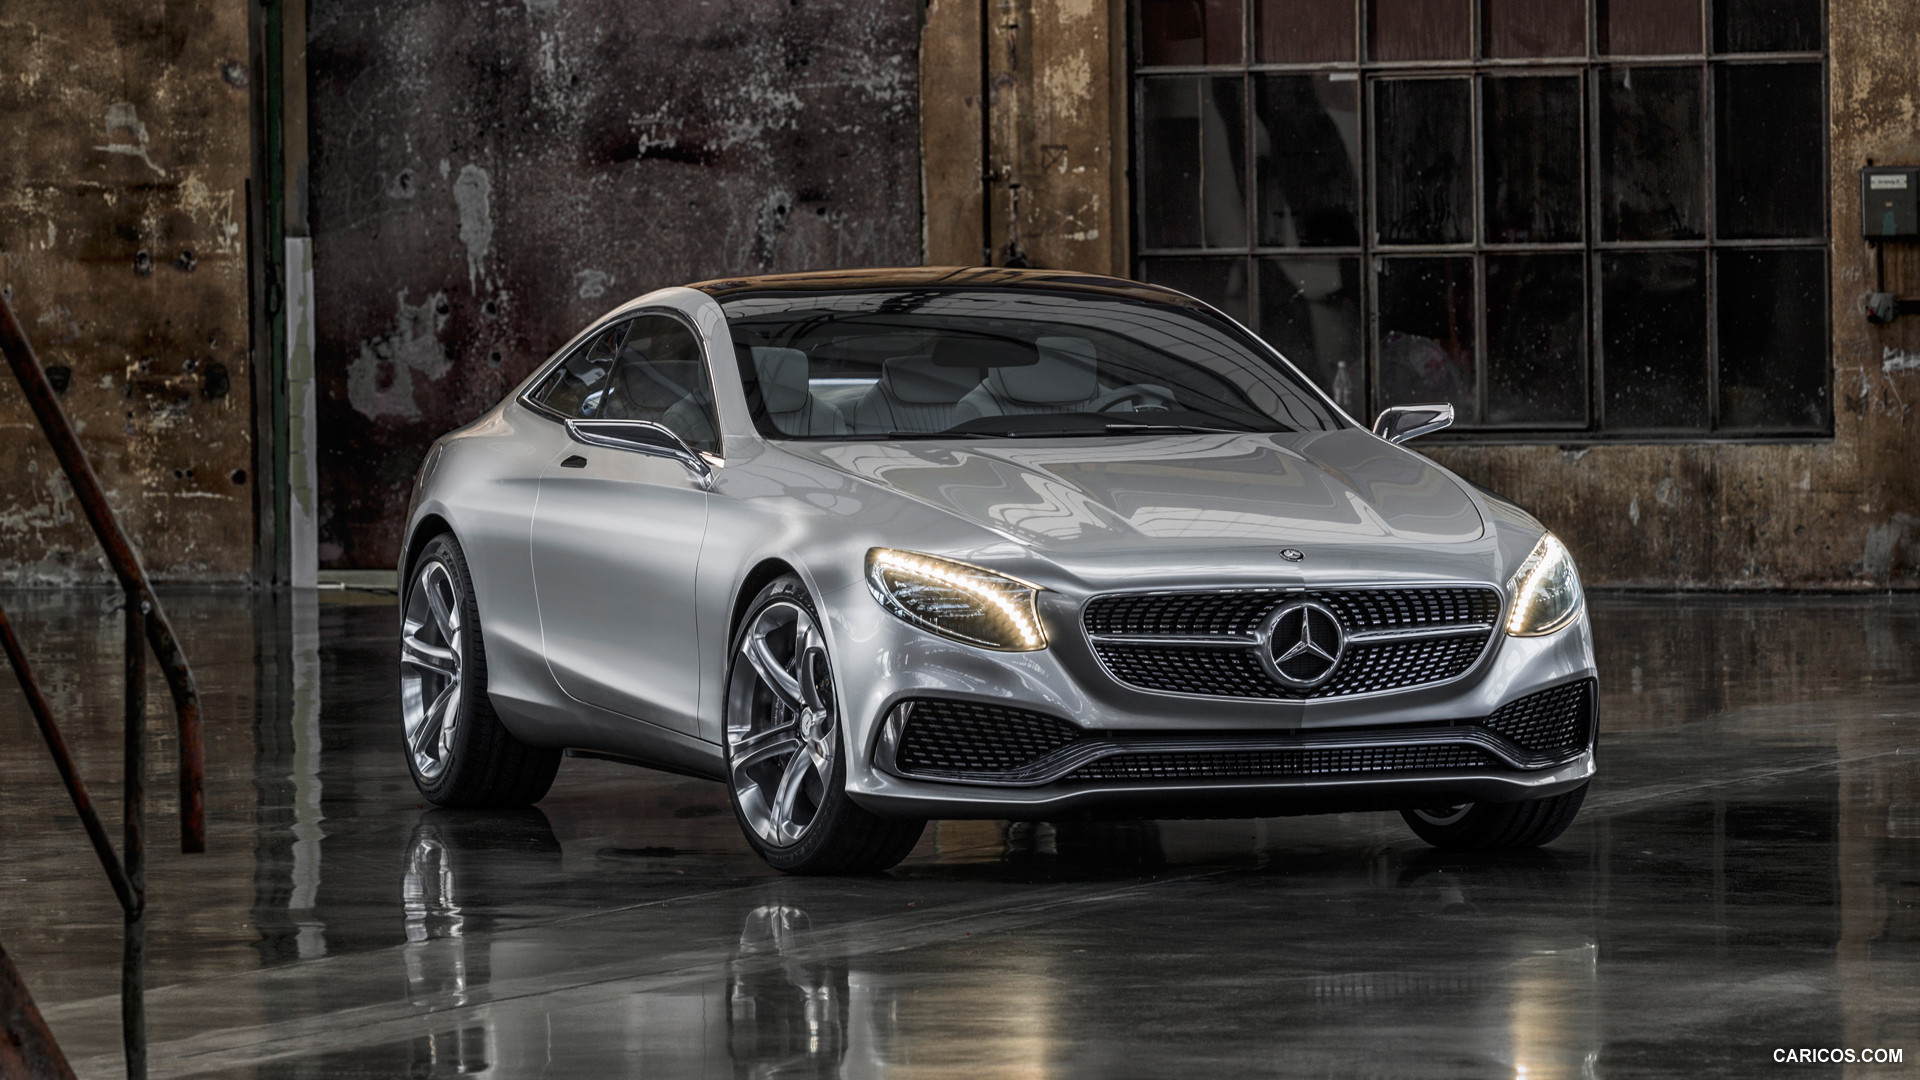 Mercedes-Benz S-Class Coupe Concept (2013)  - Front, #16 of 58